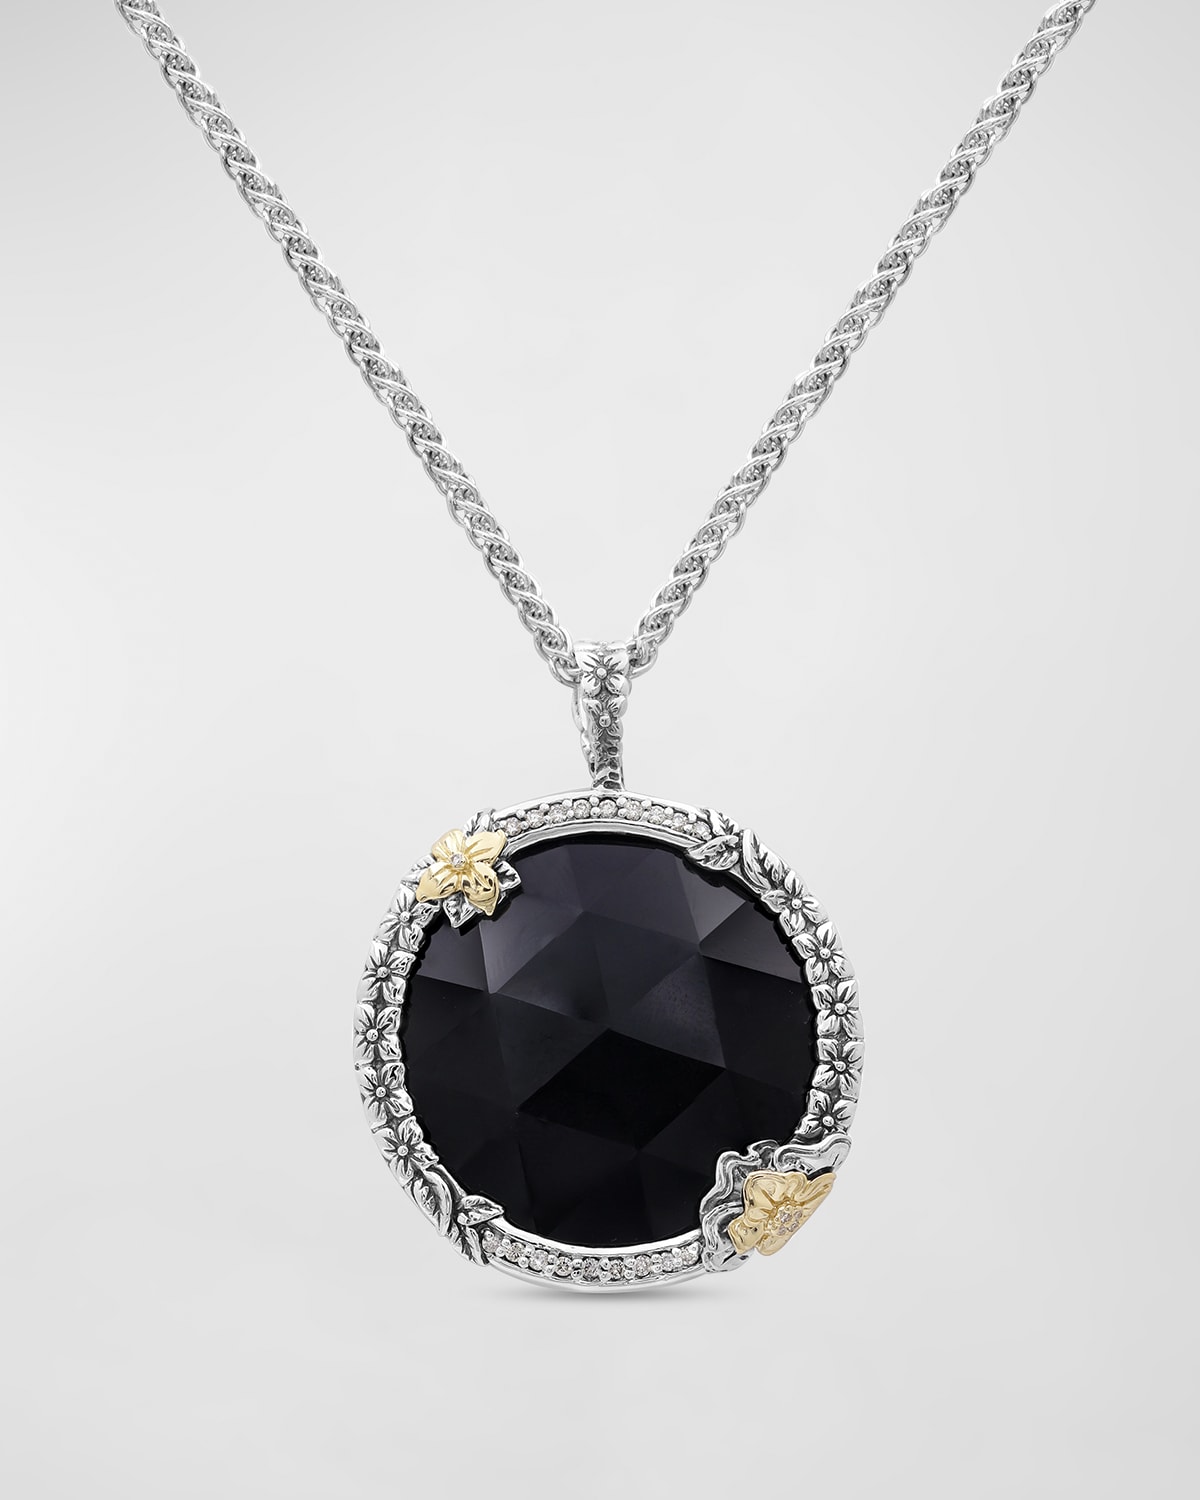 Garden of Stephen Faceted Black Onyx Pendant Necklace in Sterling Silver with 18K Gold Flowers and Diamonds